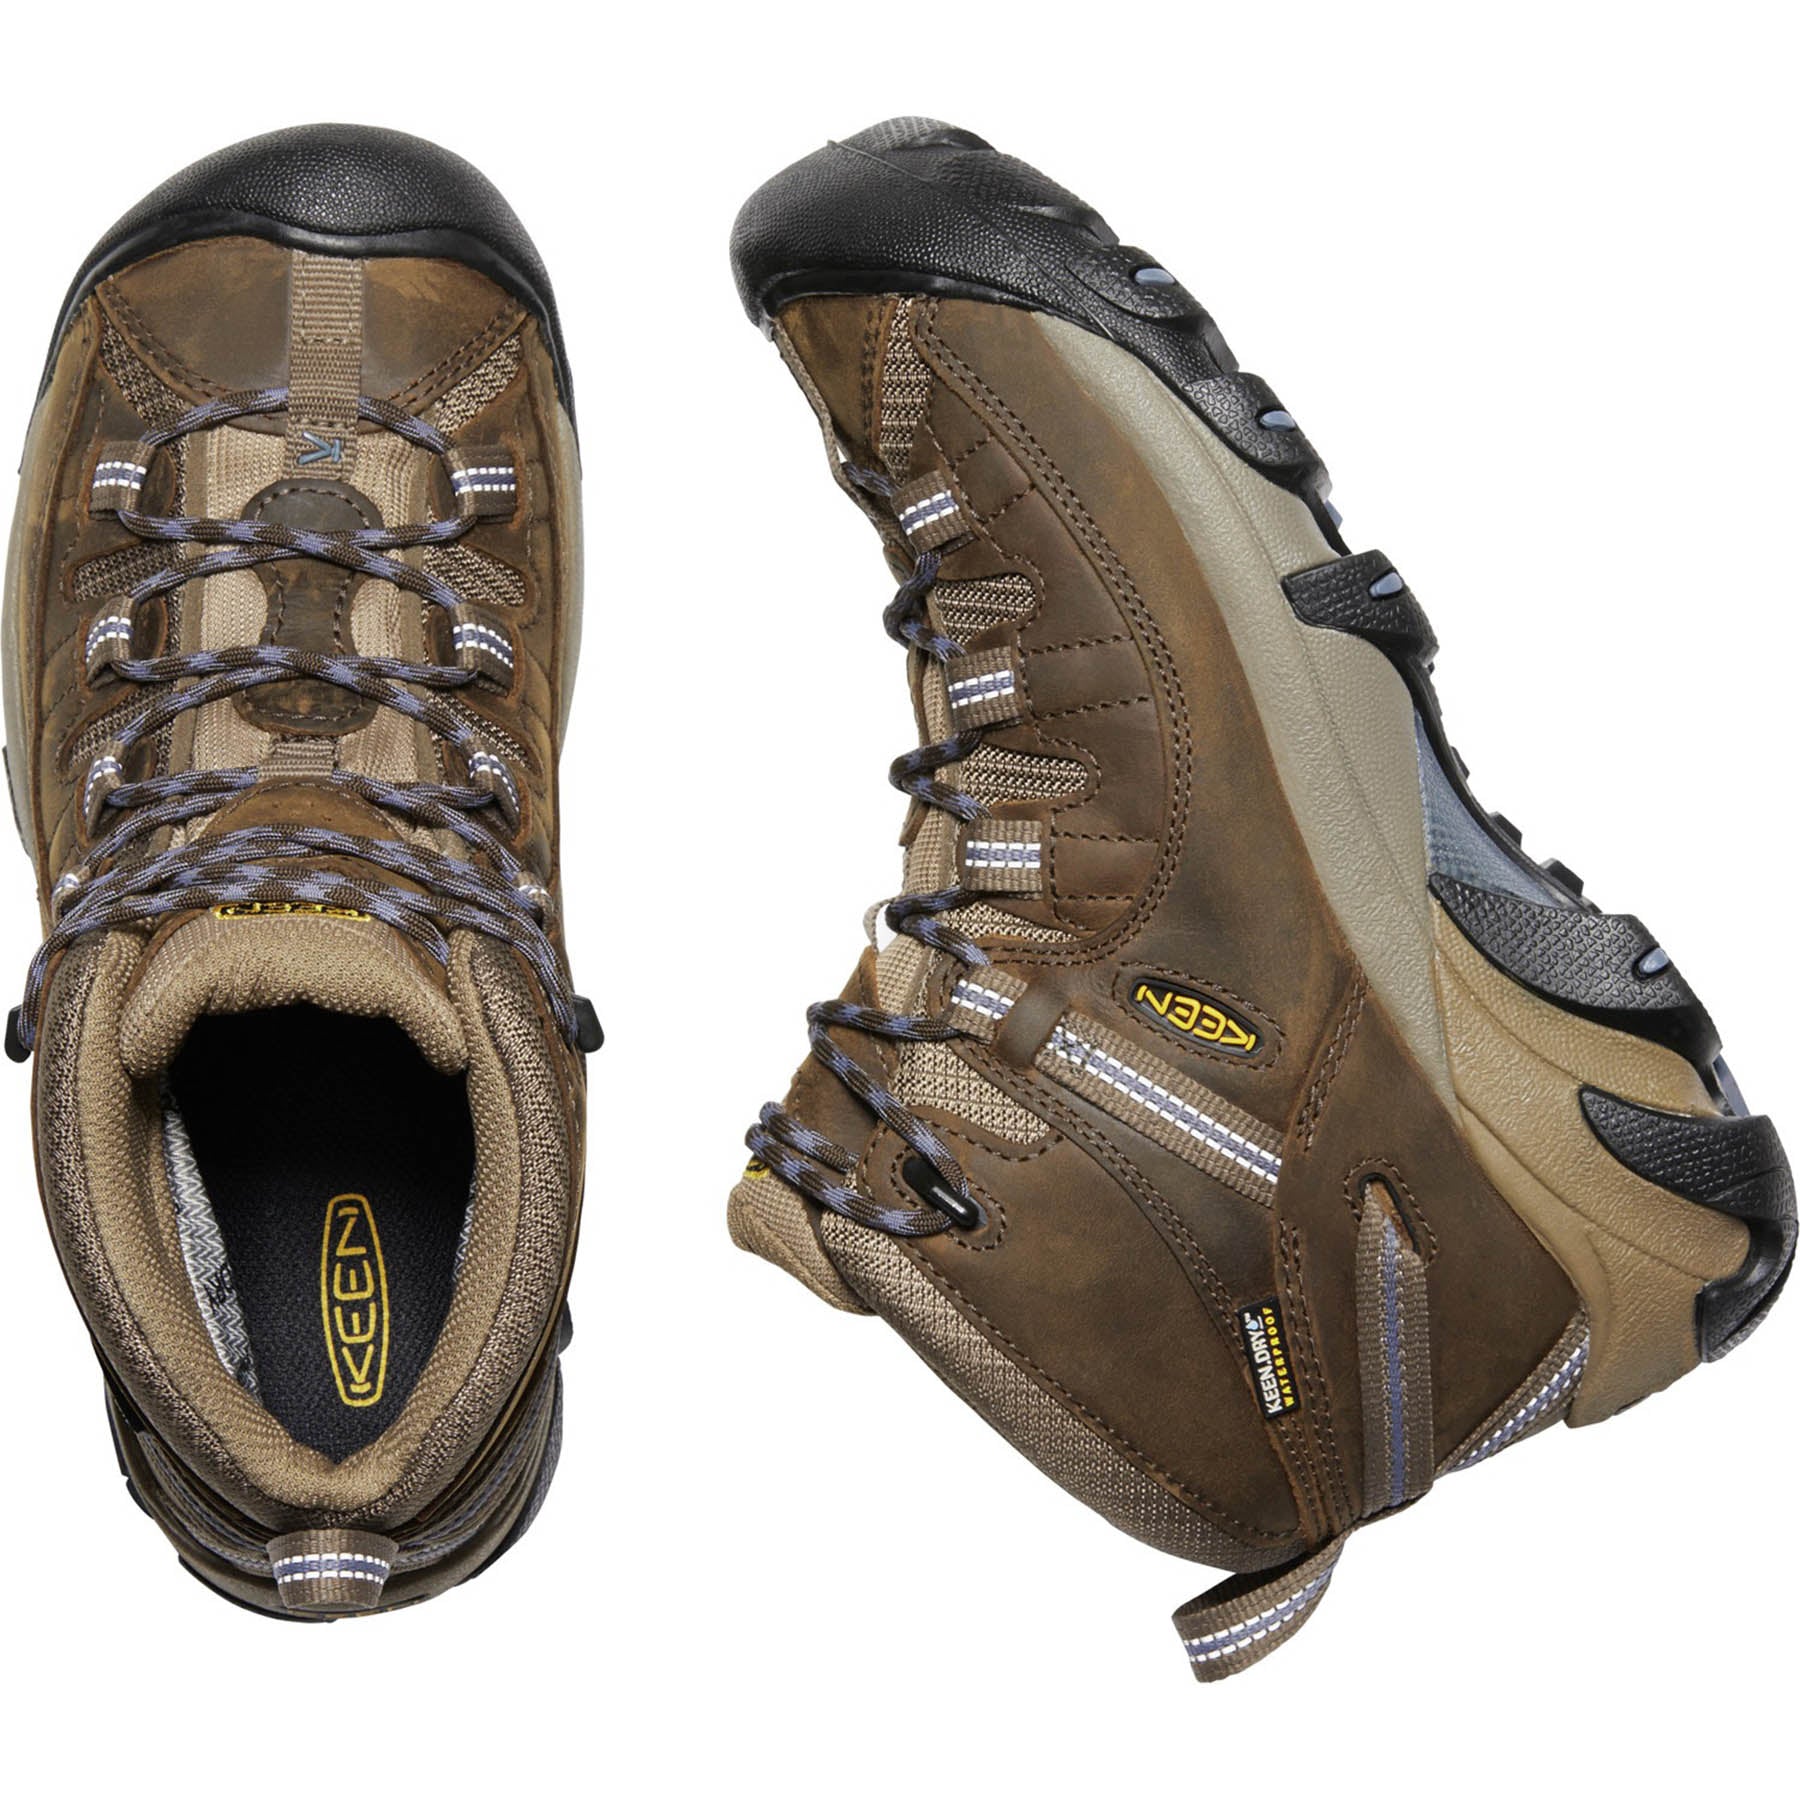 a view from above of the targhee II women's mid waterproof boot